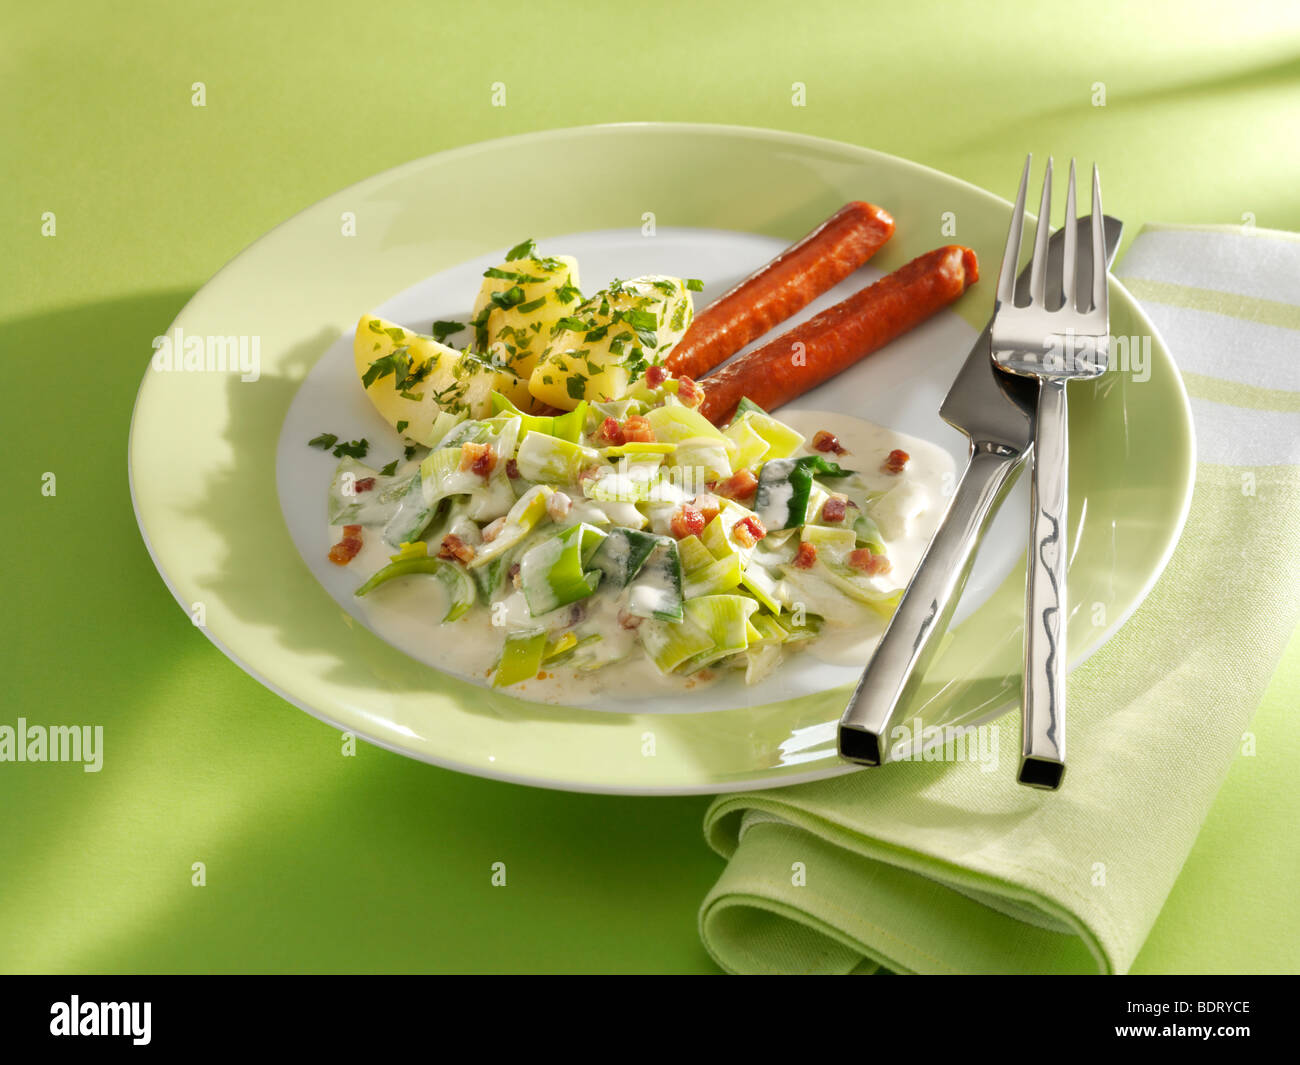 Leek vegetables with potatoes, bacon and Debreziner sausage Stock Photo